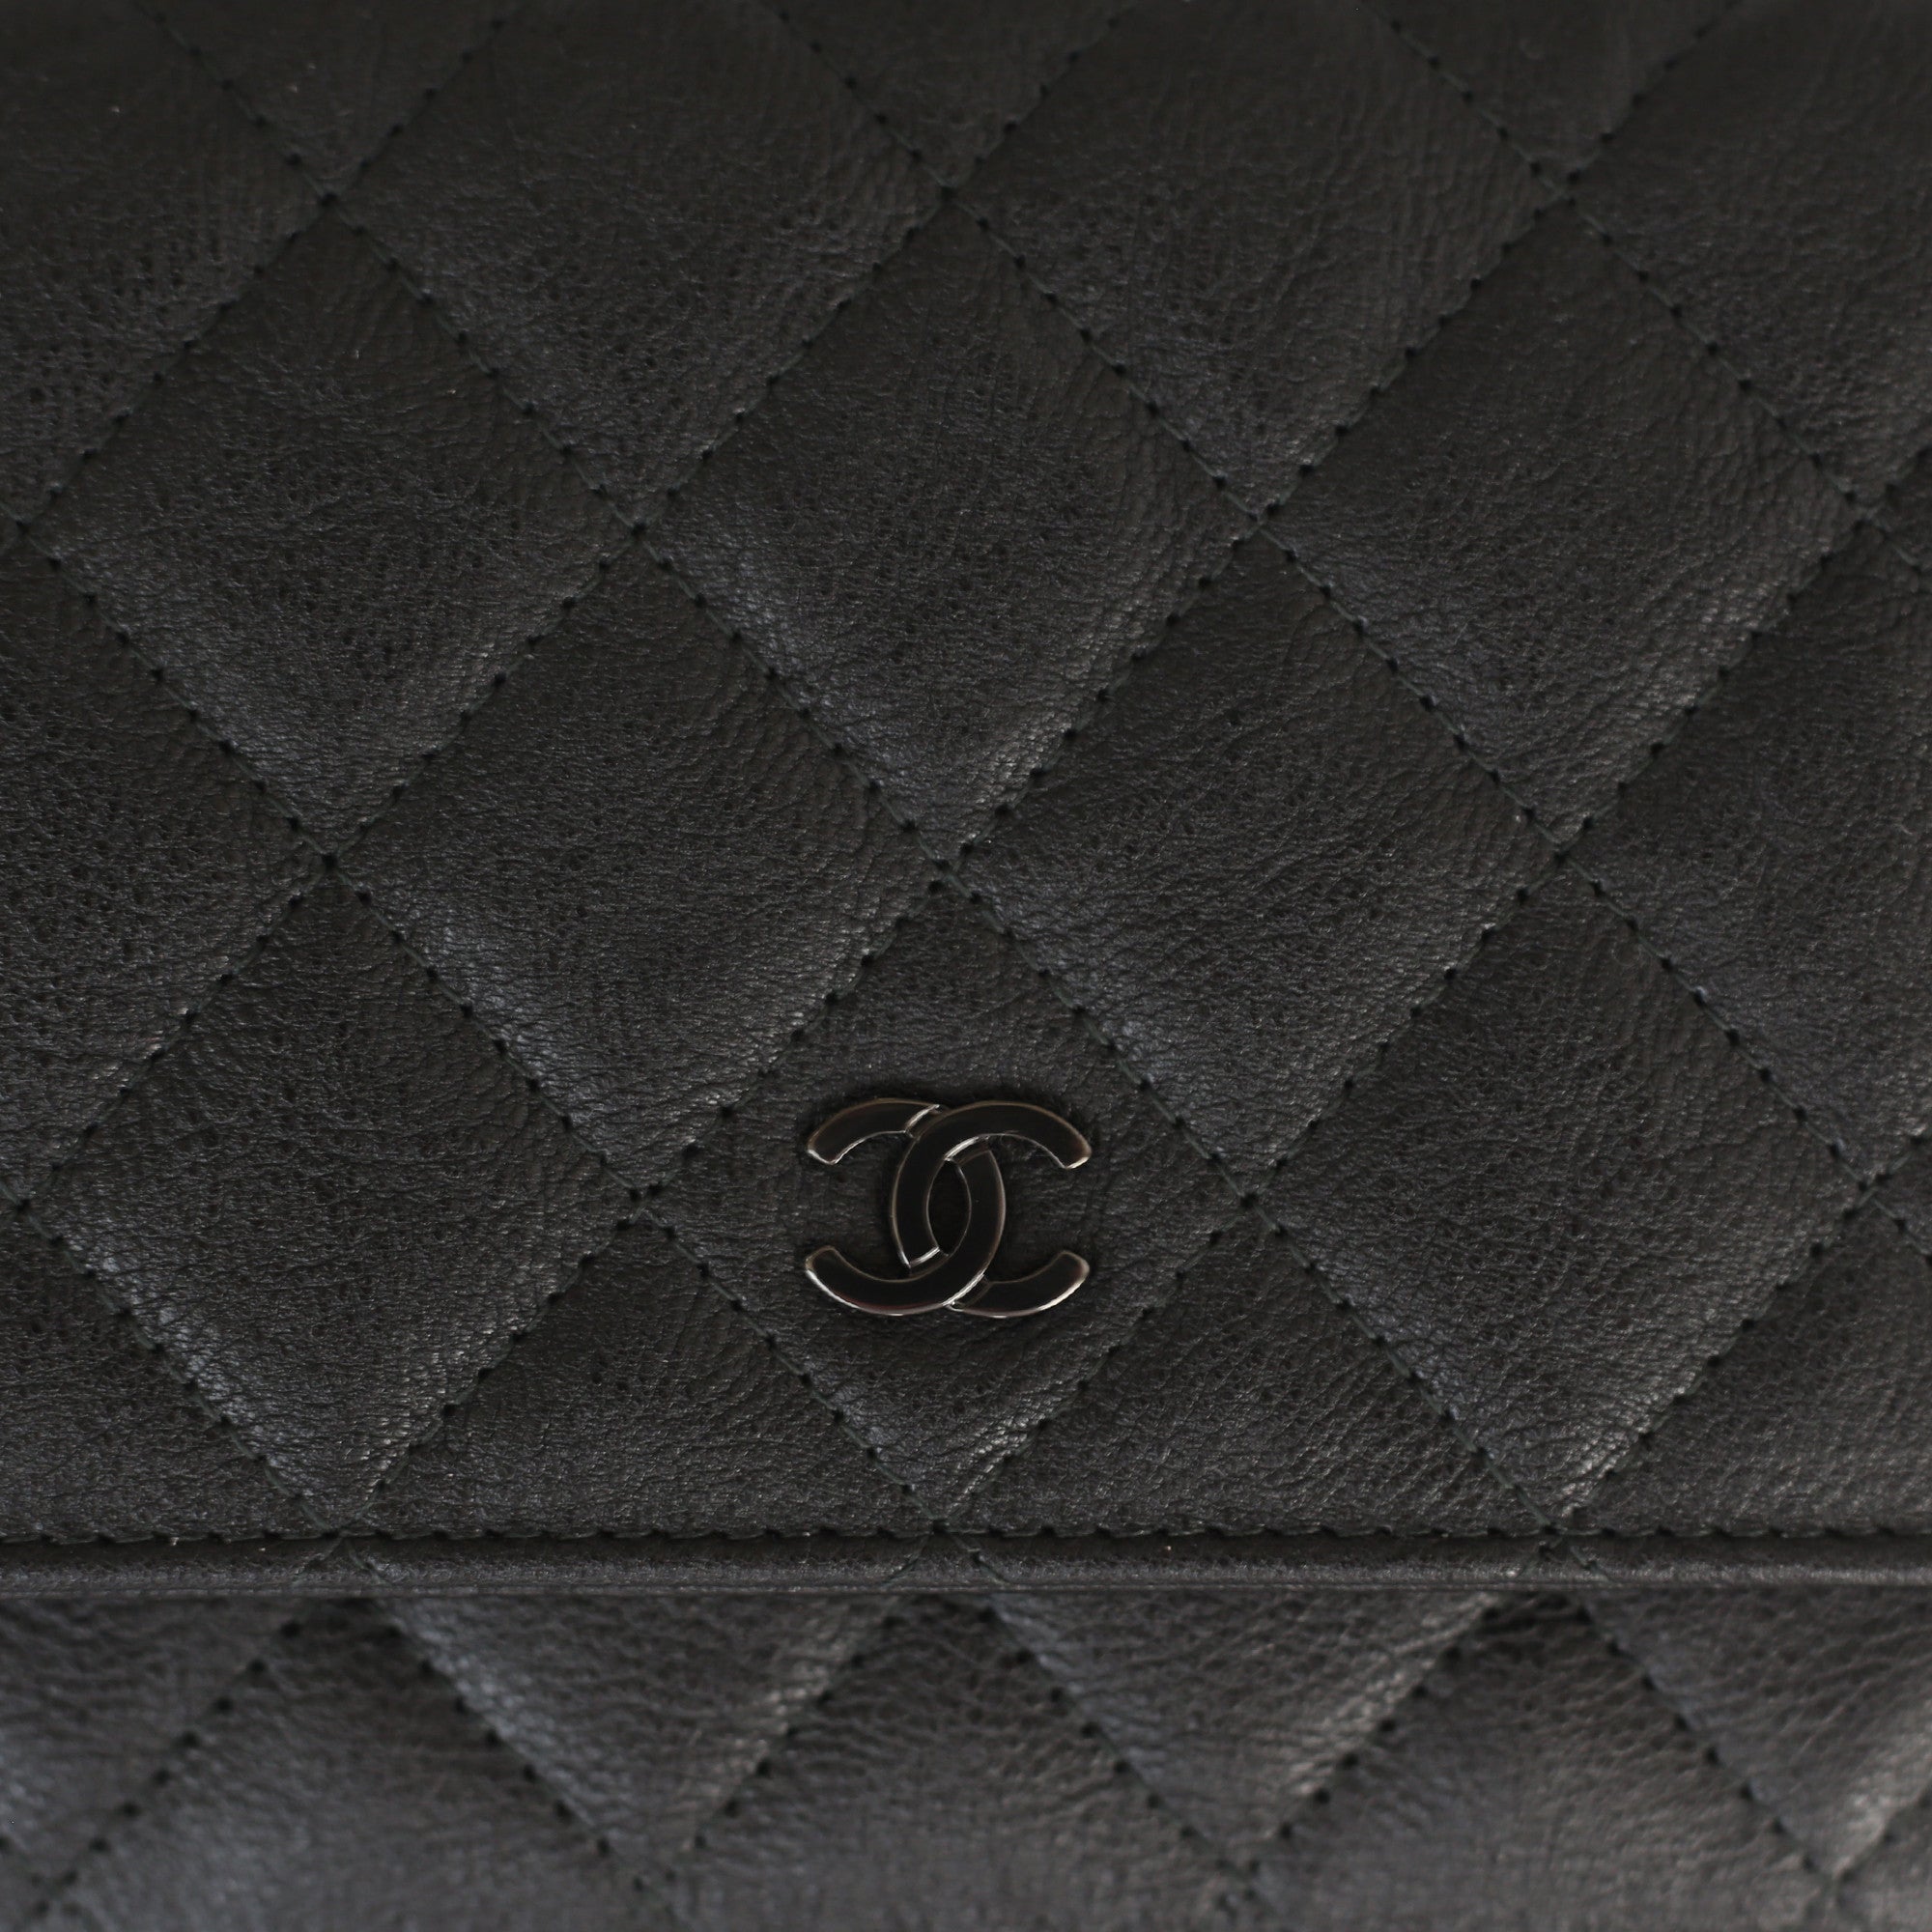 Chanel, Calfskin Classic So Black Wallet on Chain